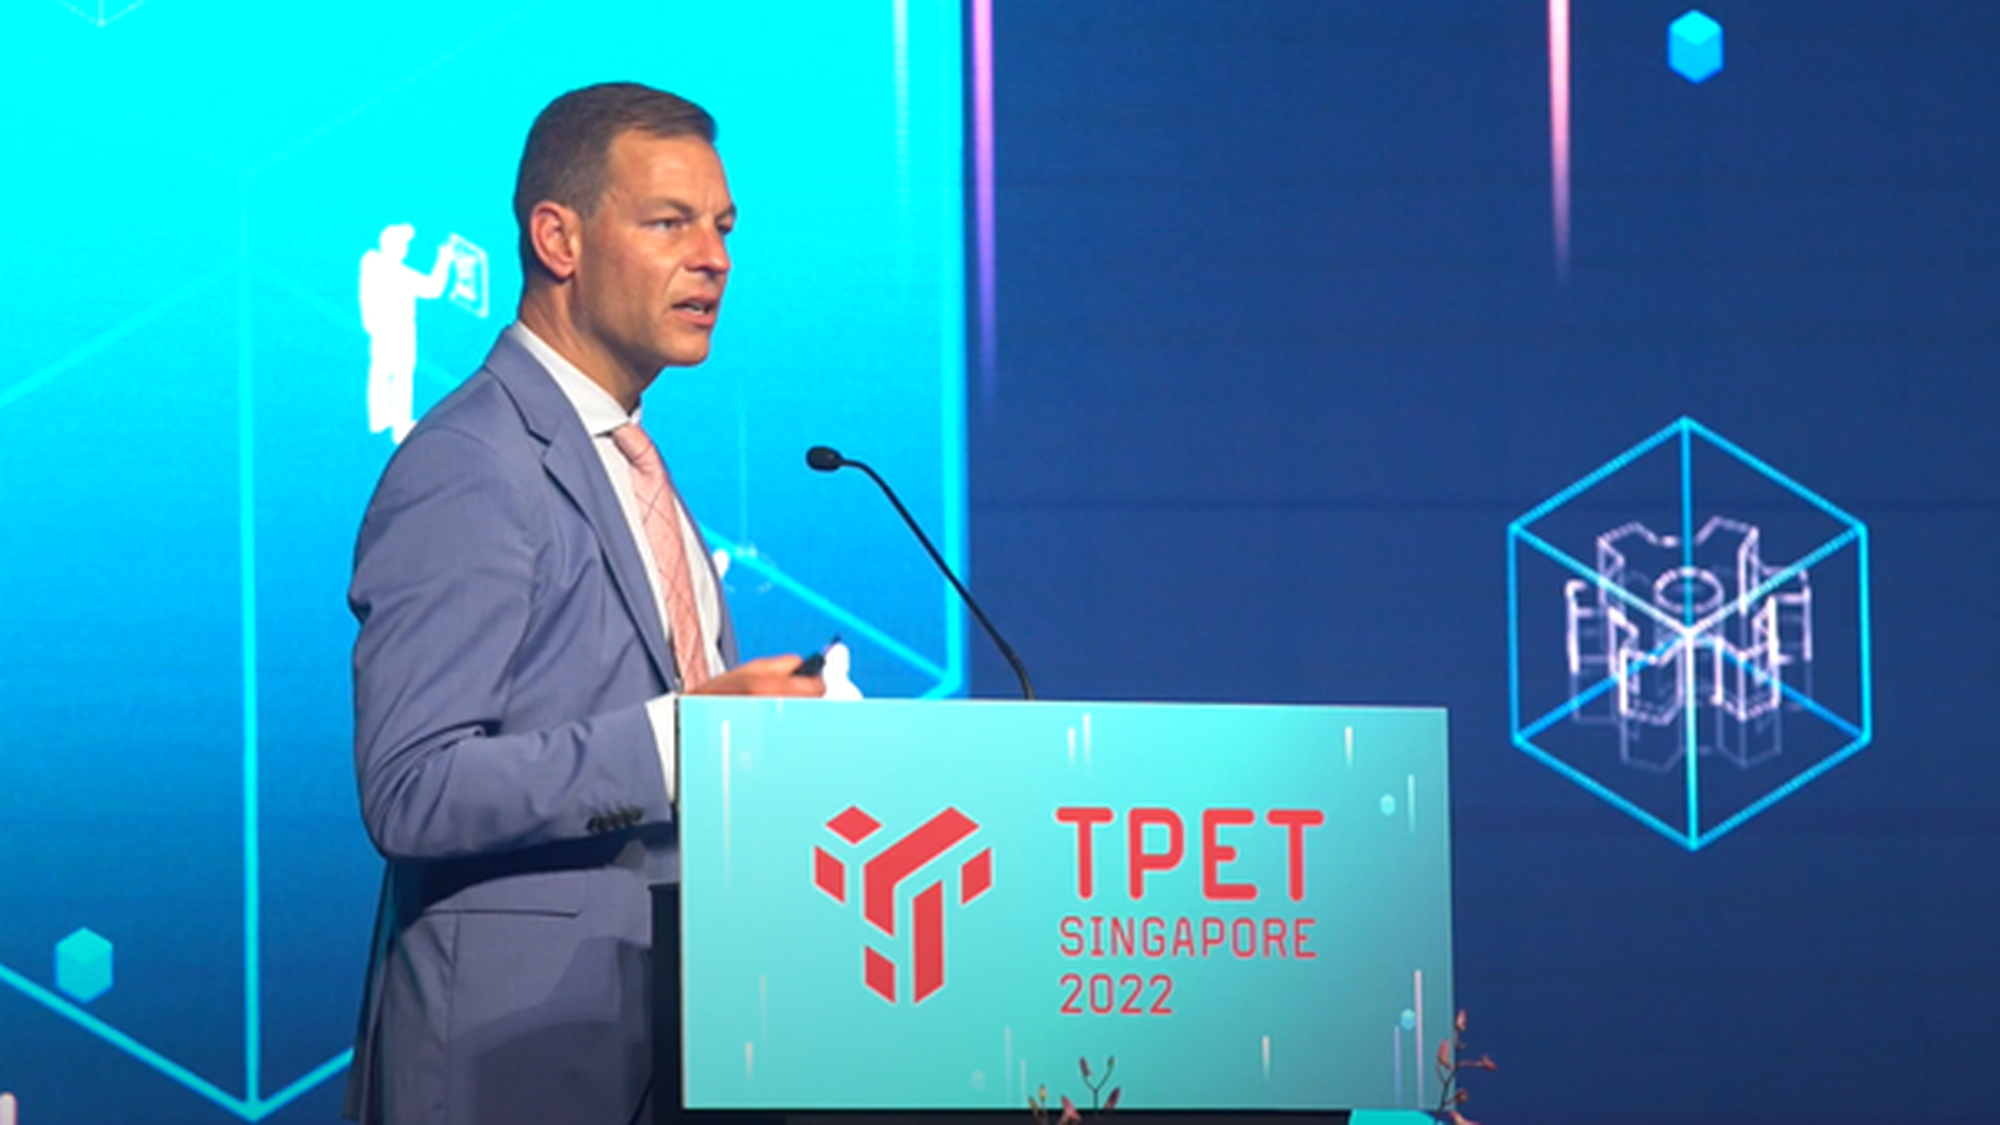 Rémy Hübschi speaking at the TPET Conference (Credit: ITE Singapore)